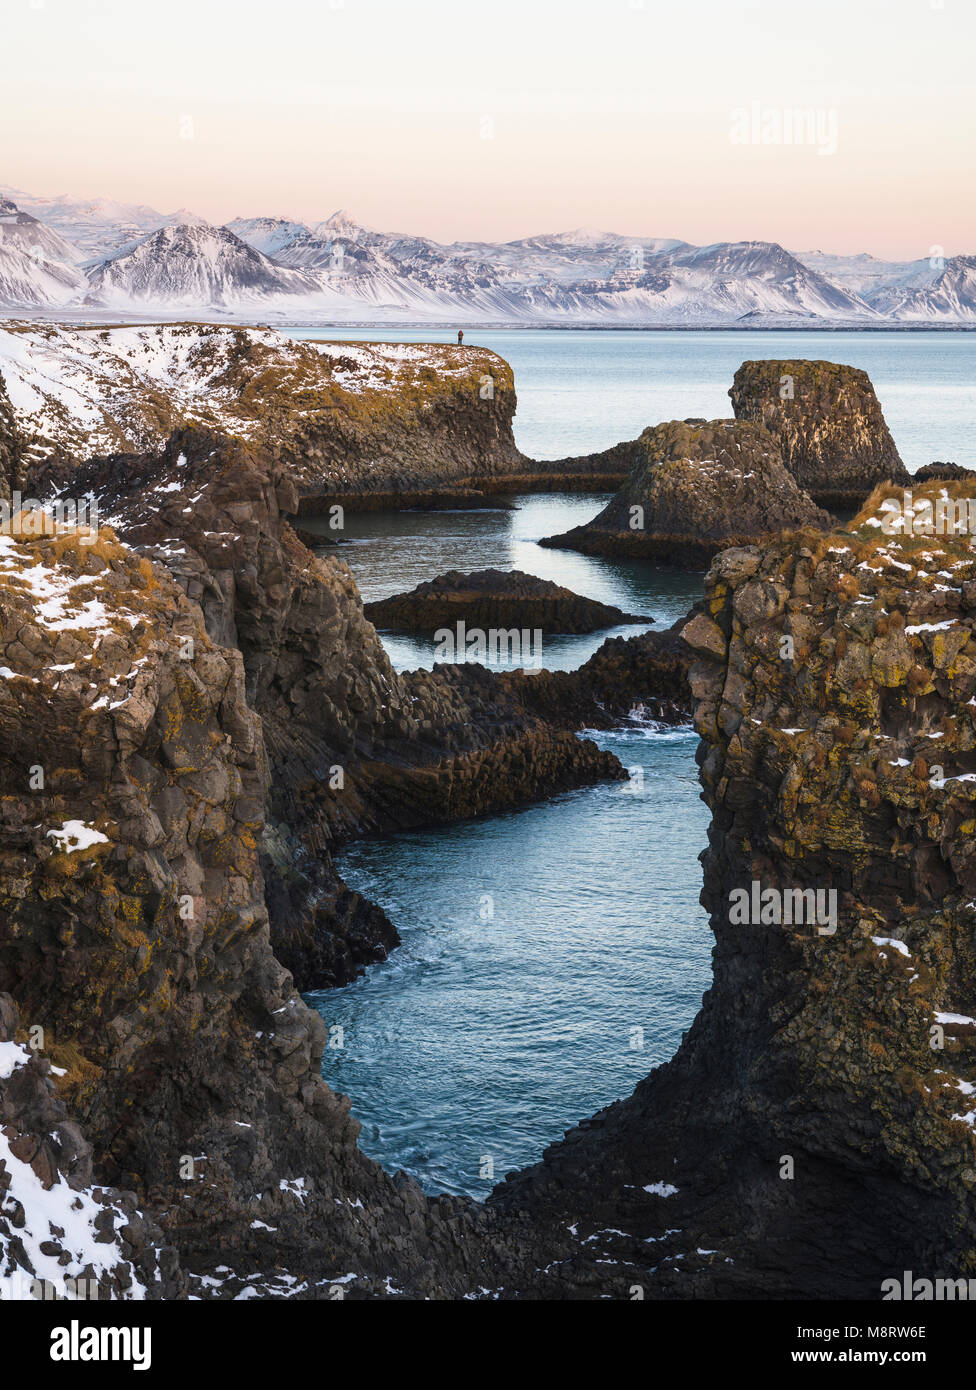 Idyllic view of rock formations in sea against mountains during winter Stock Photo